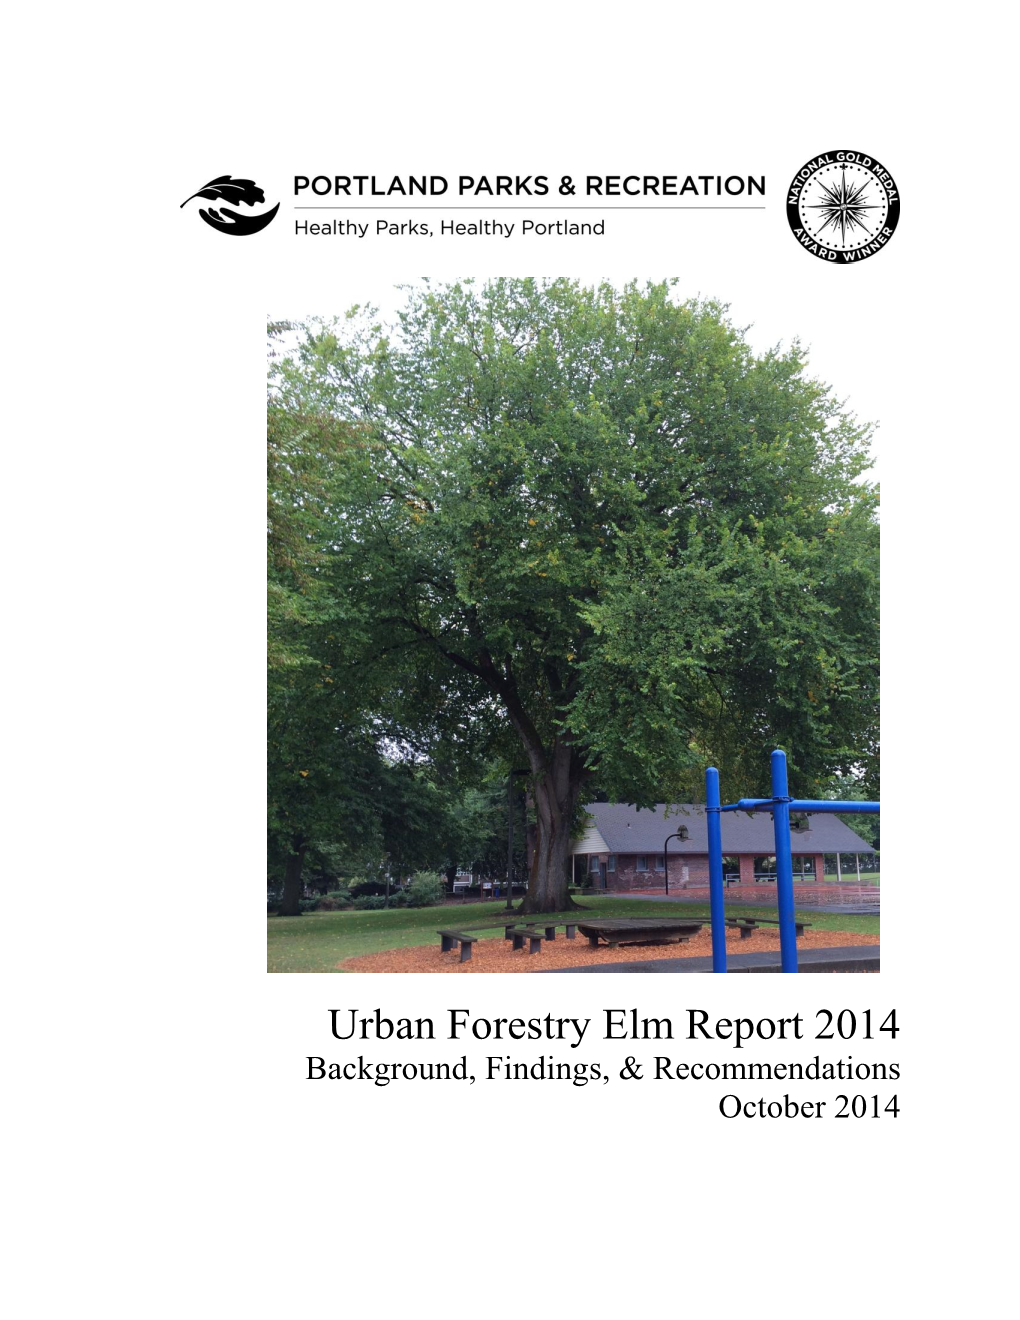 Urban Forestry Elm Report 2014 Background, Findings, & Recommendations October 2014